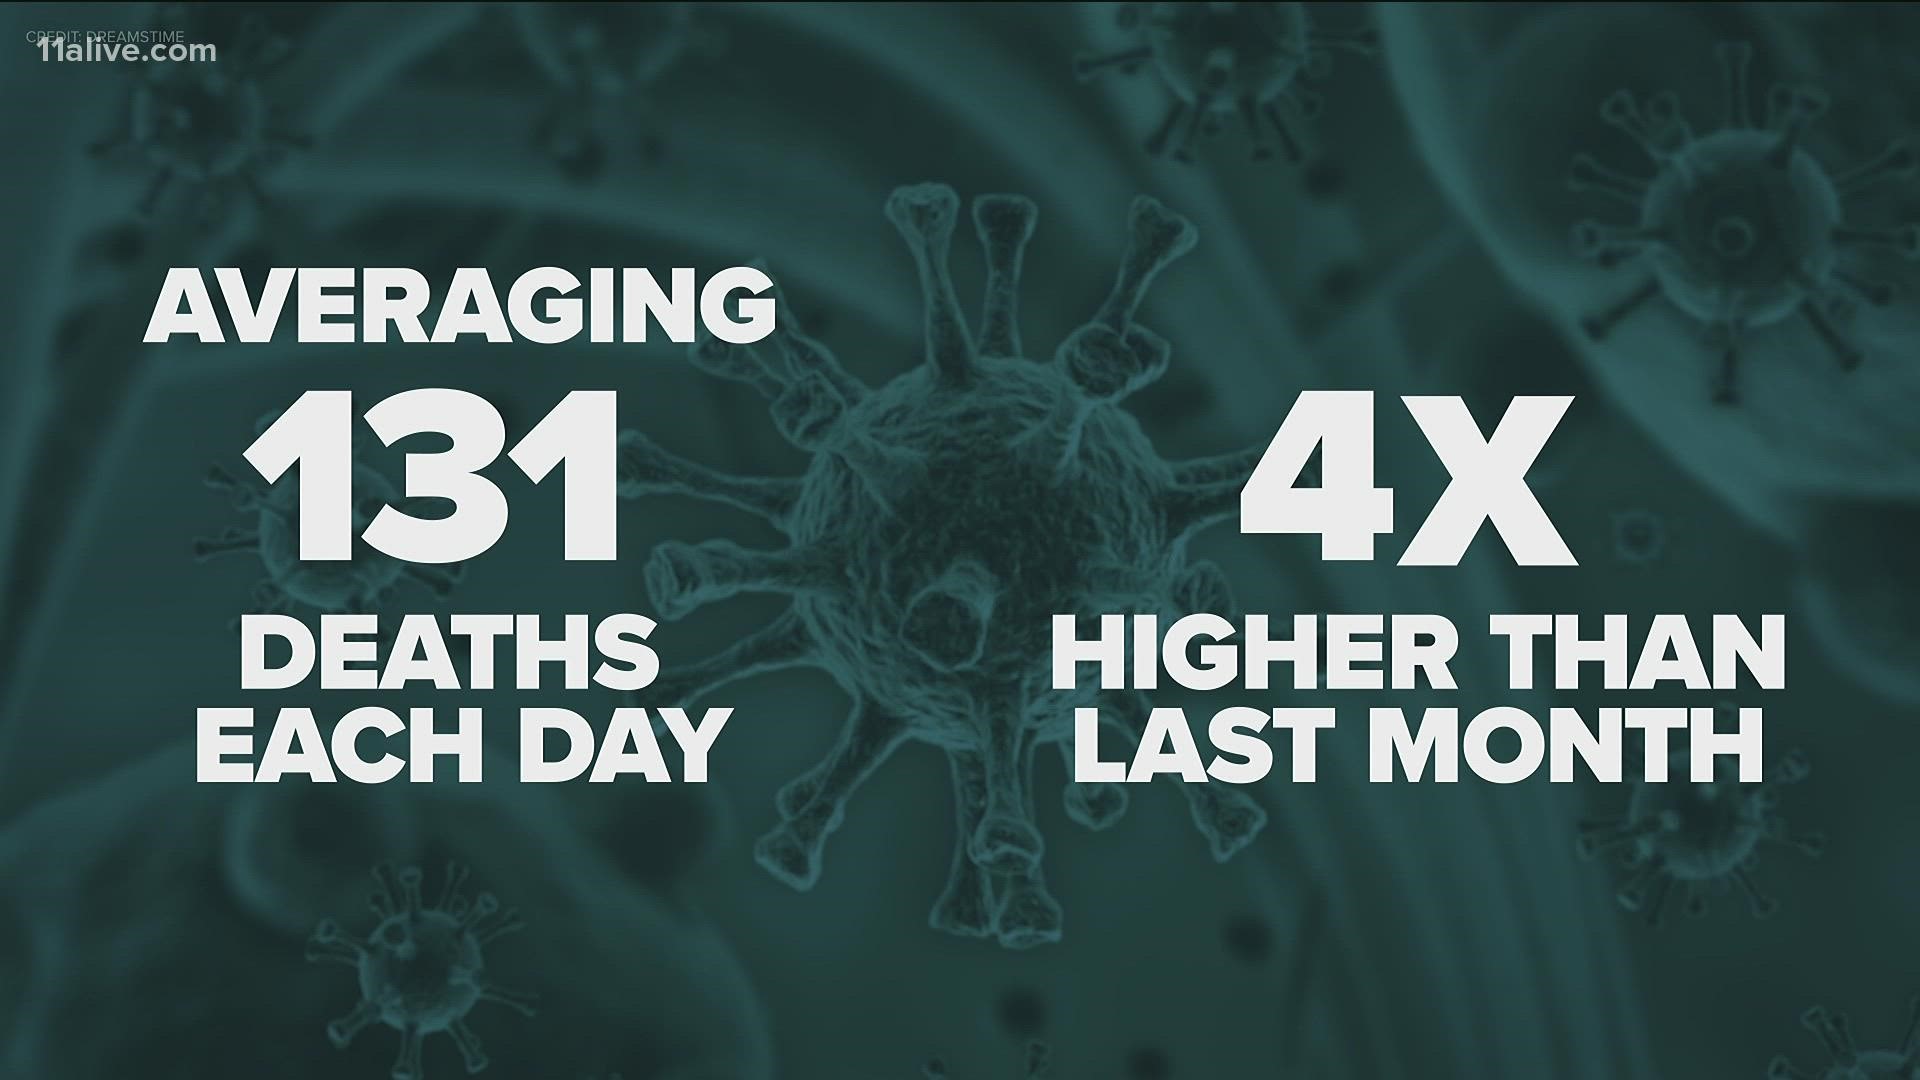 More people are dying from the virus.